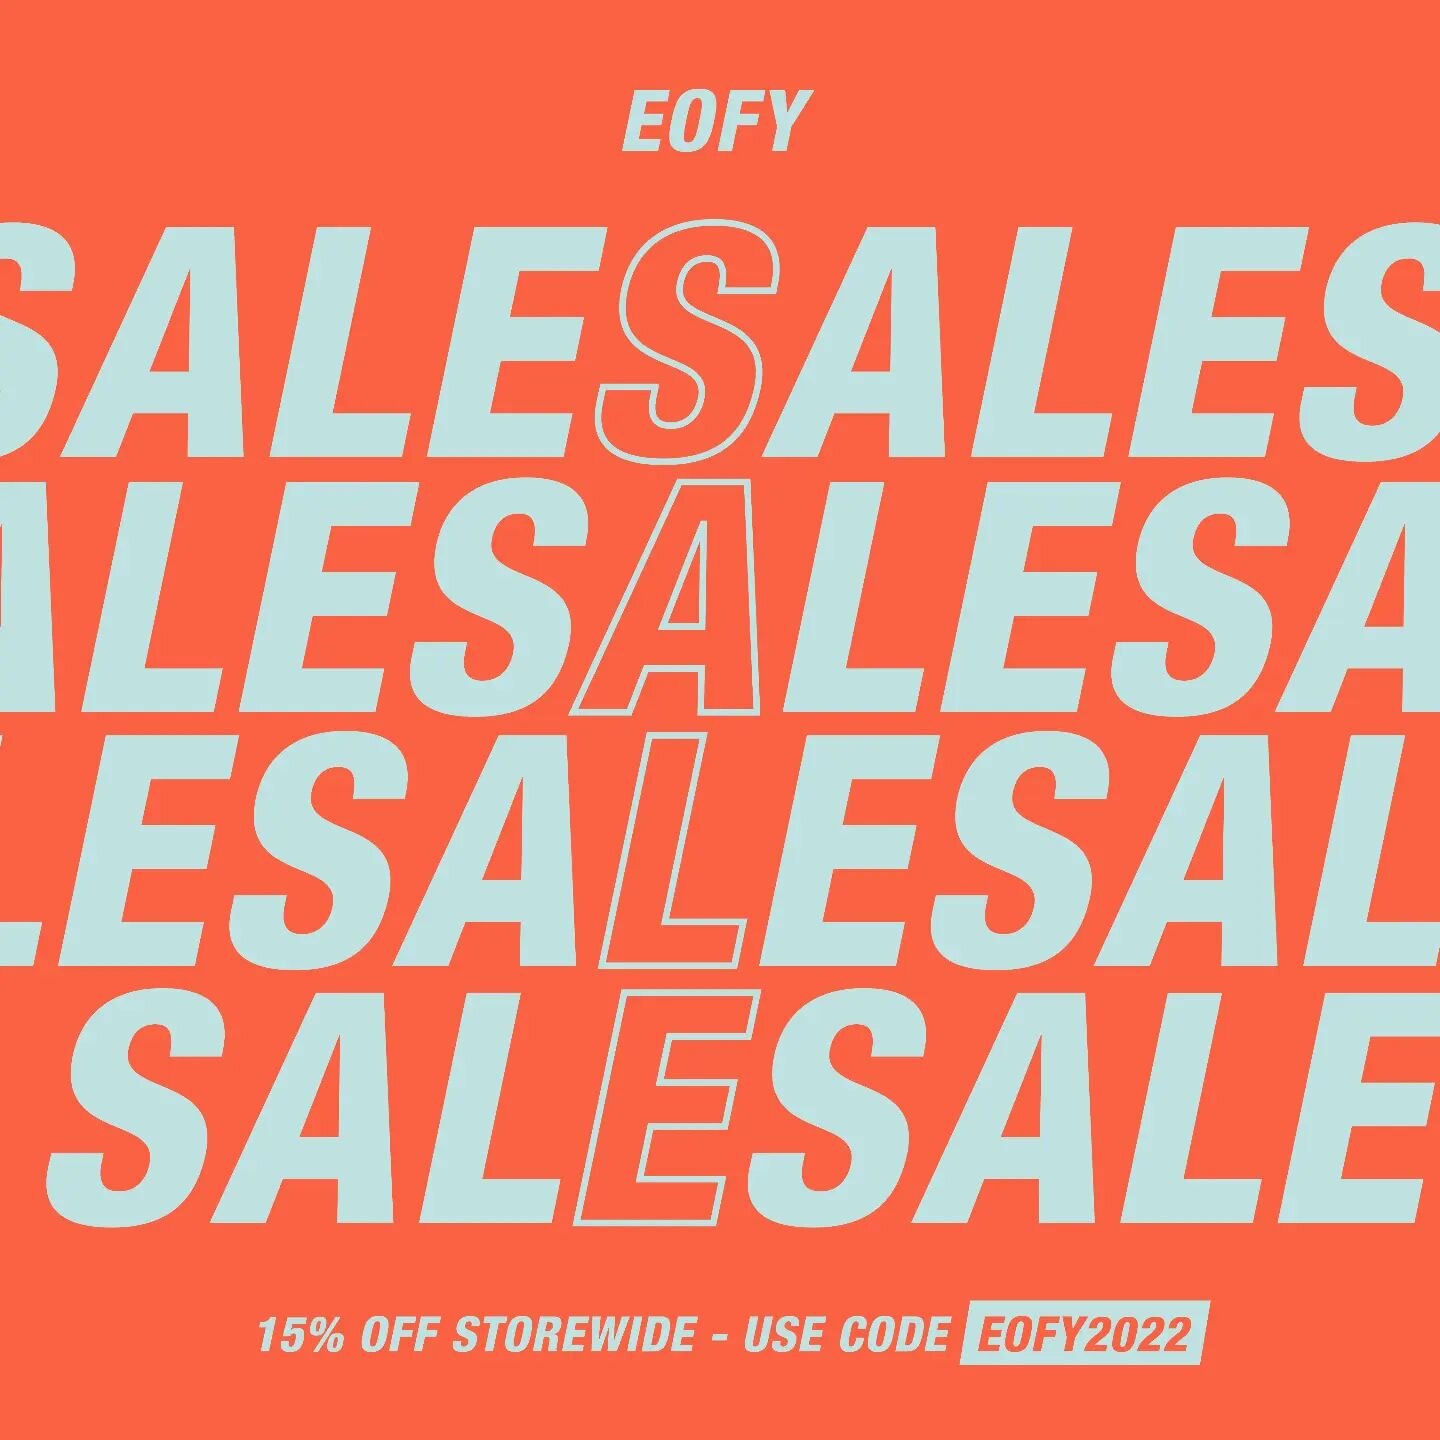 EOFY SALE! Only a few days to go, 15% off storewide!